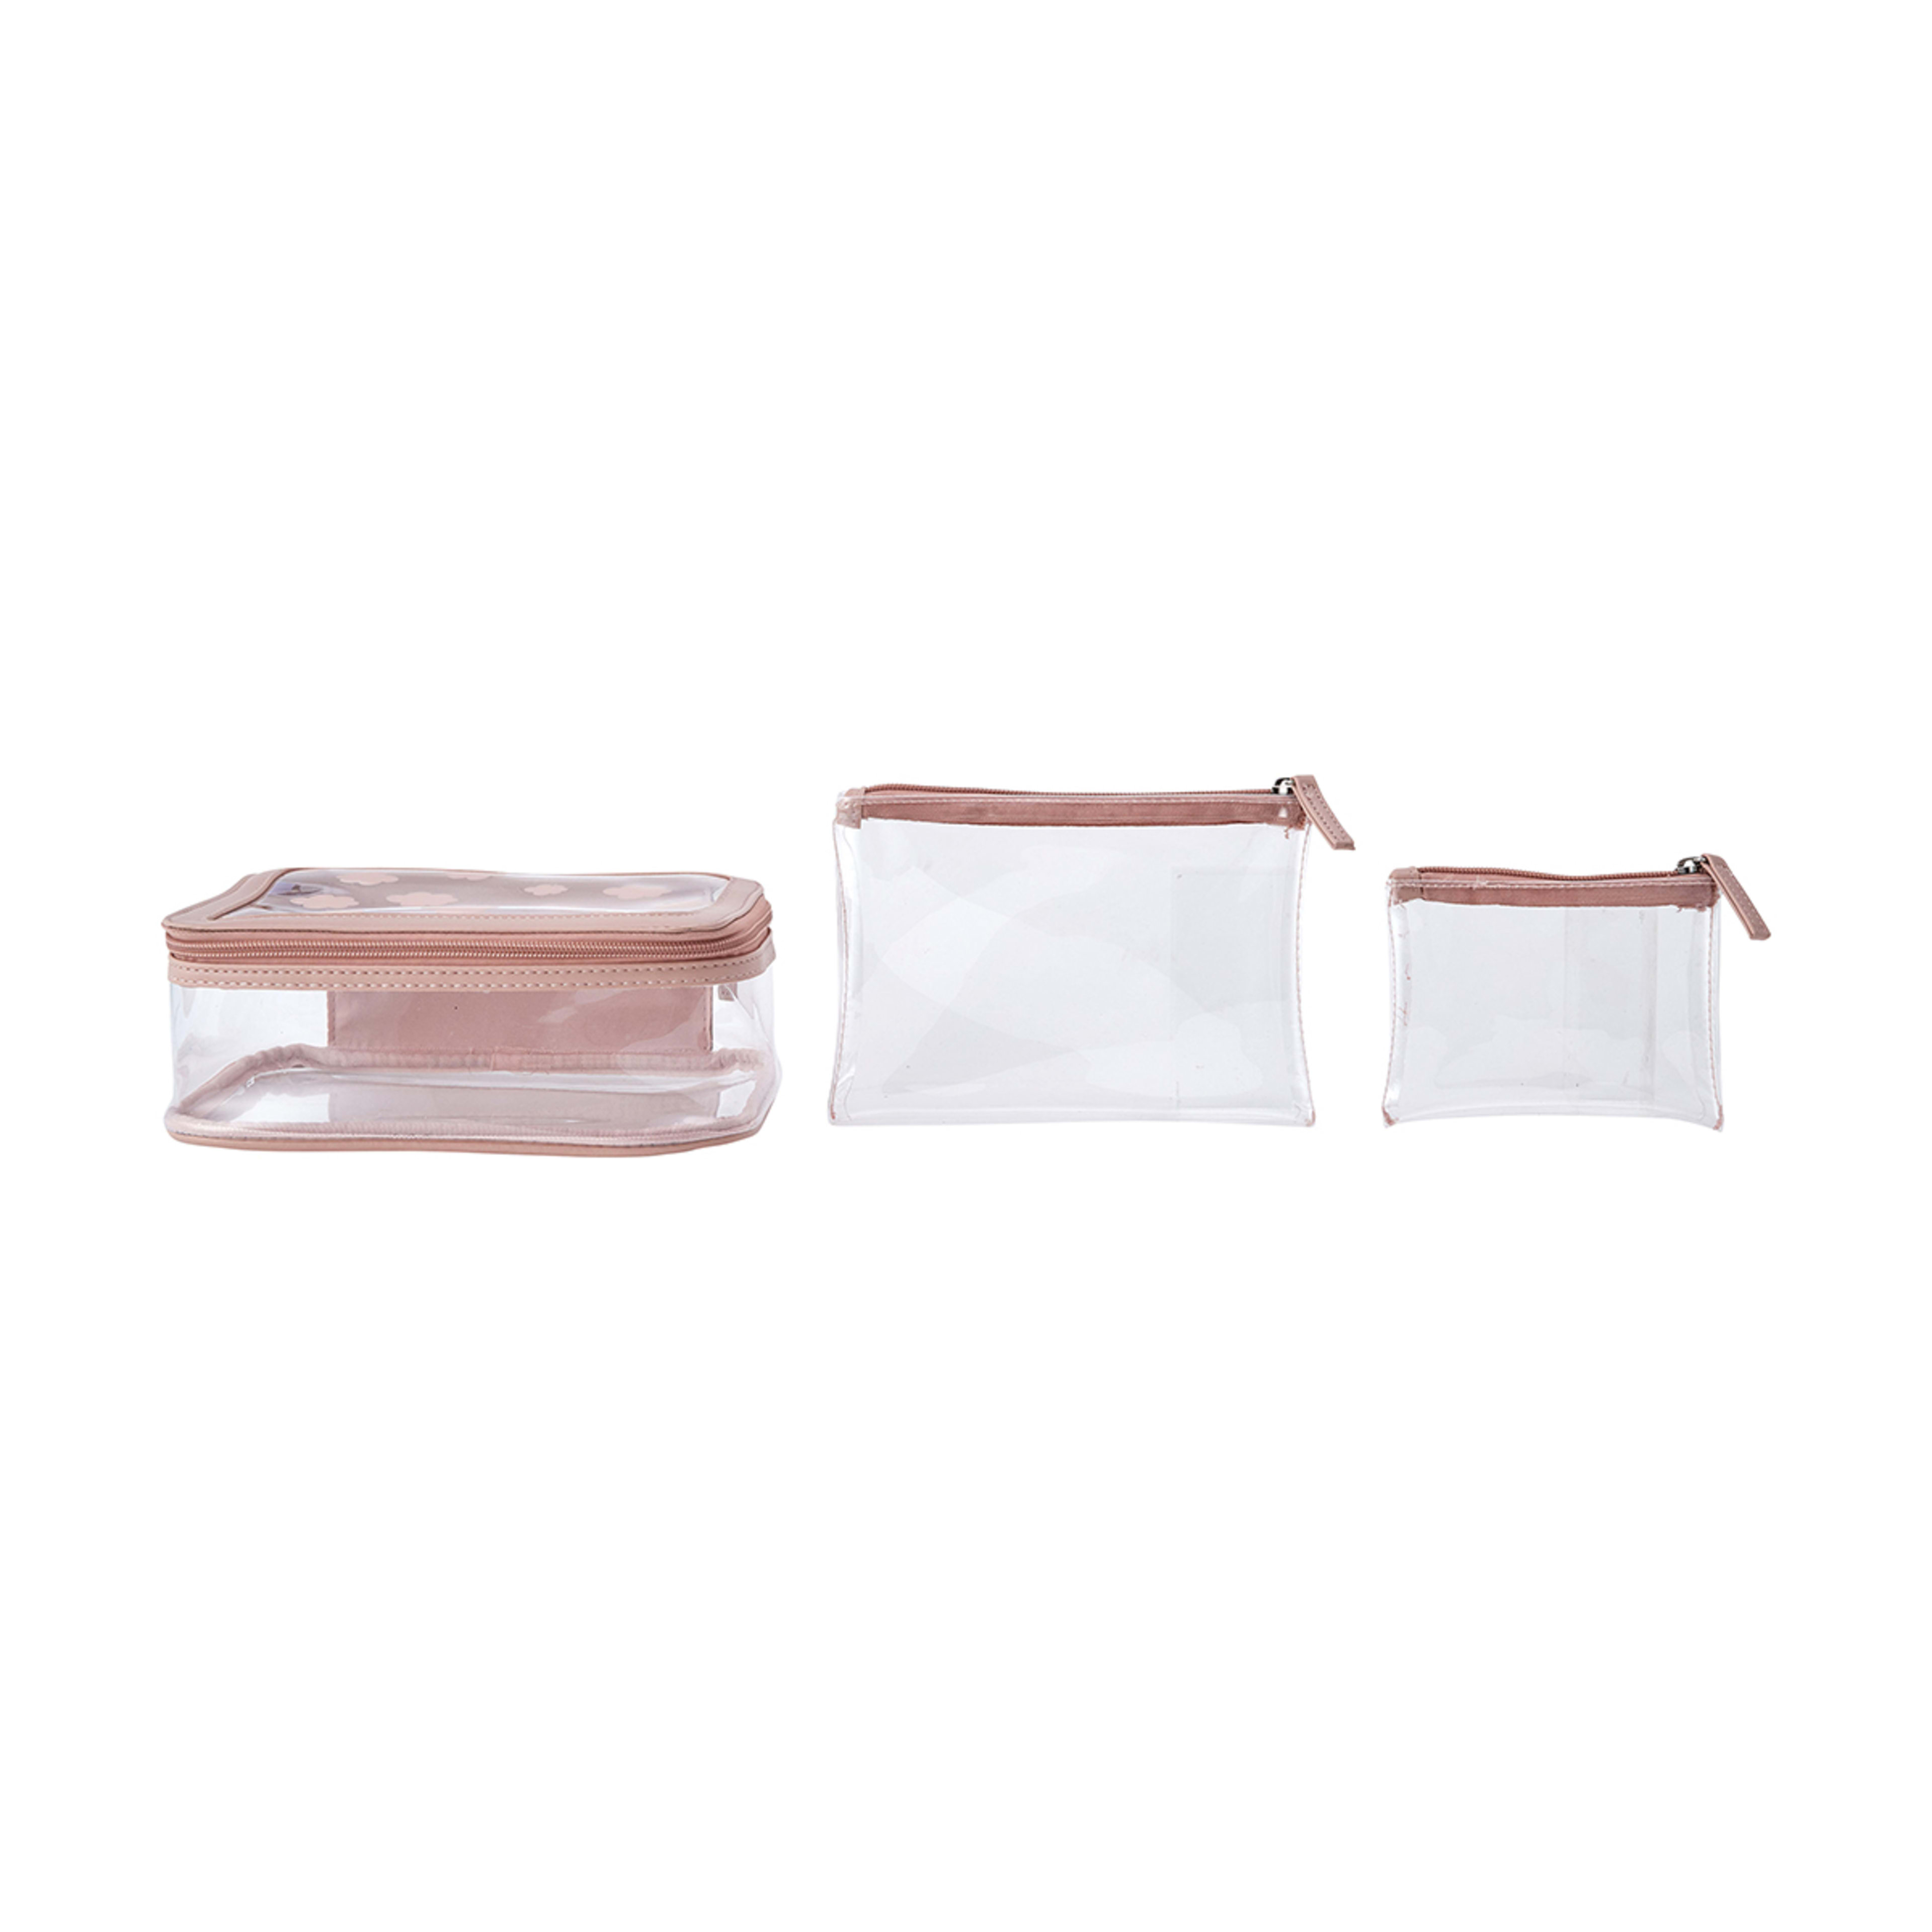 Cosmetic Bag Set - Clear Pink - Kmart